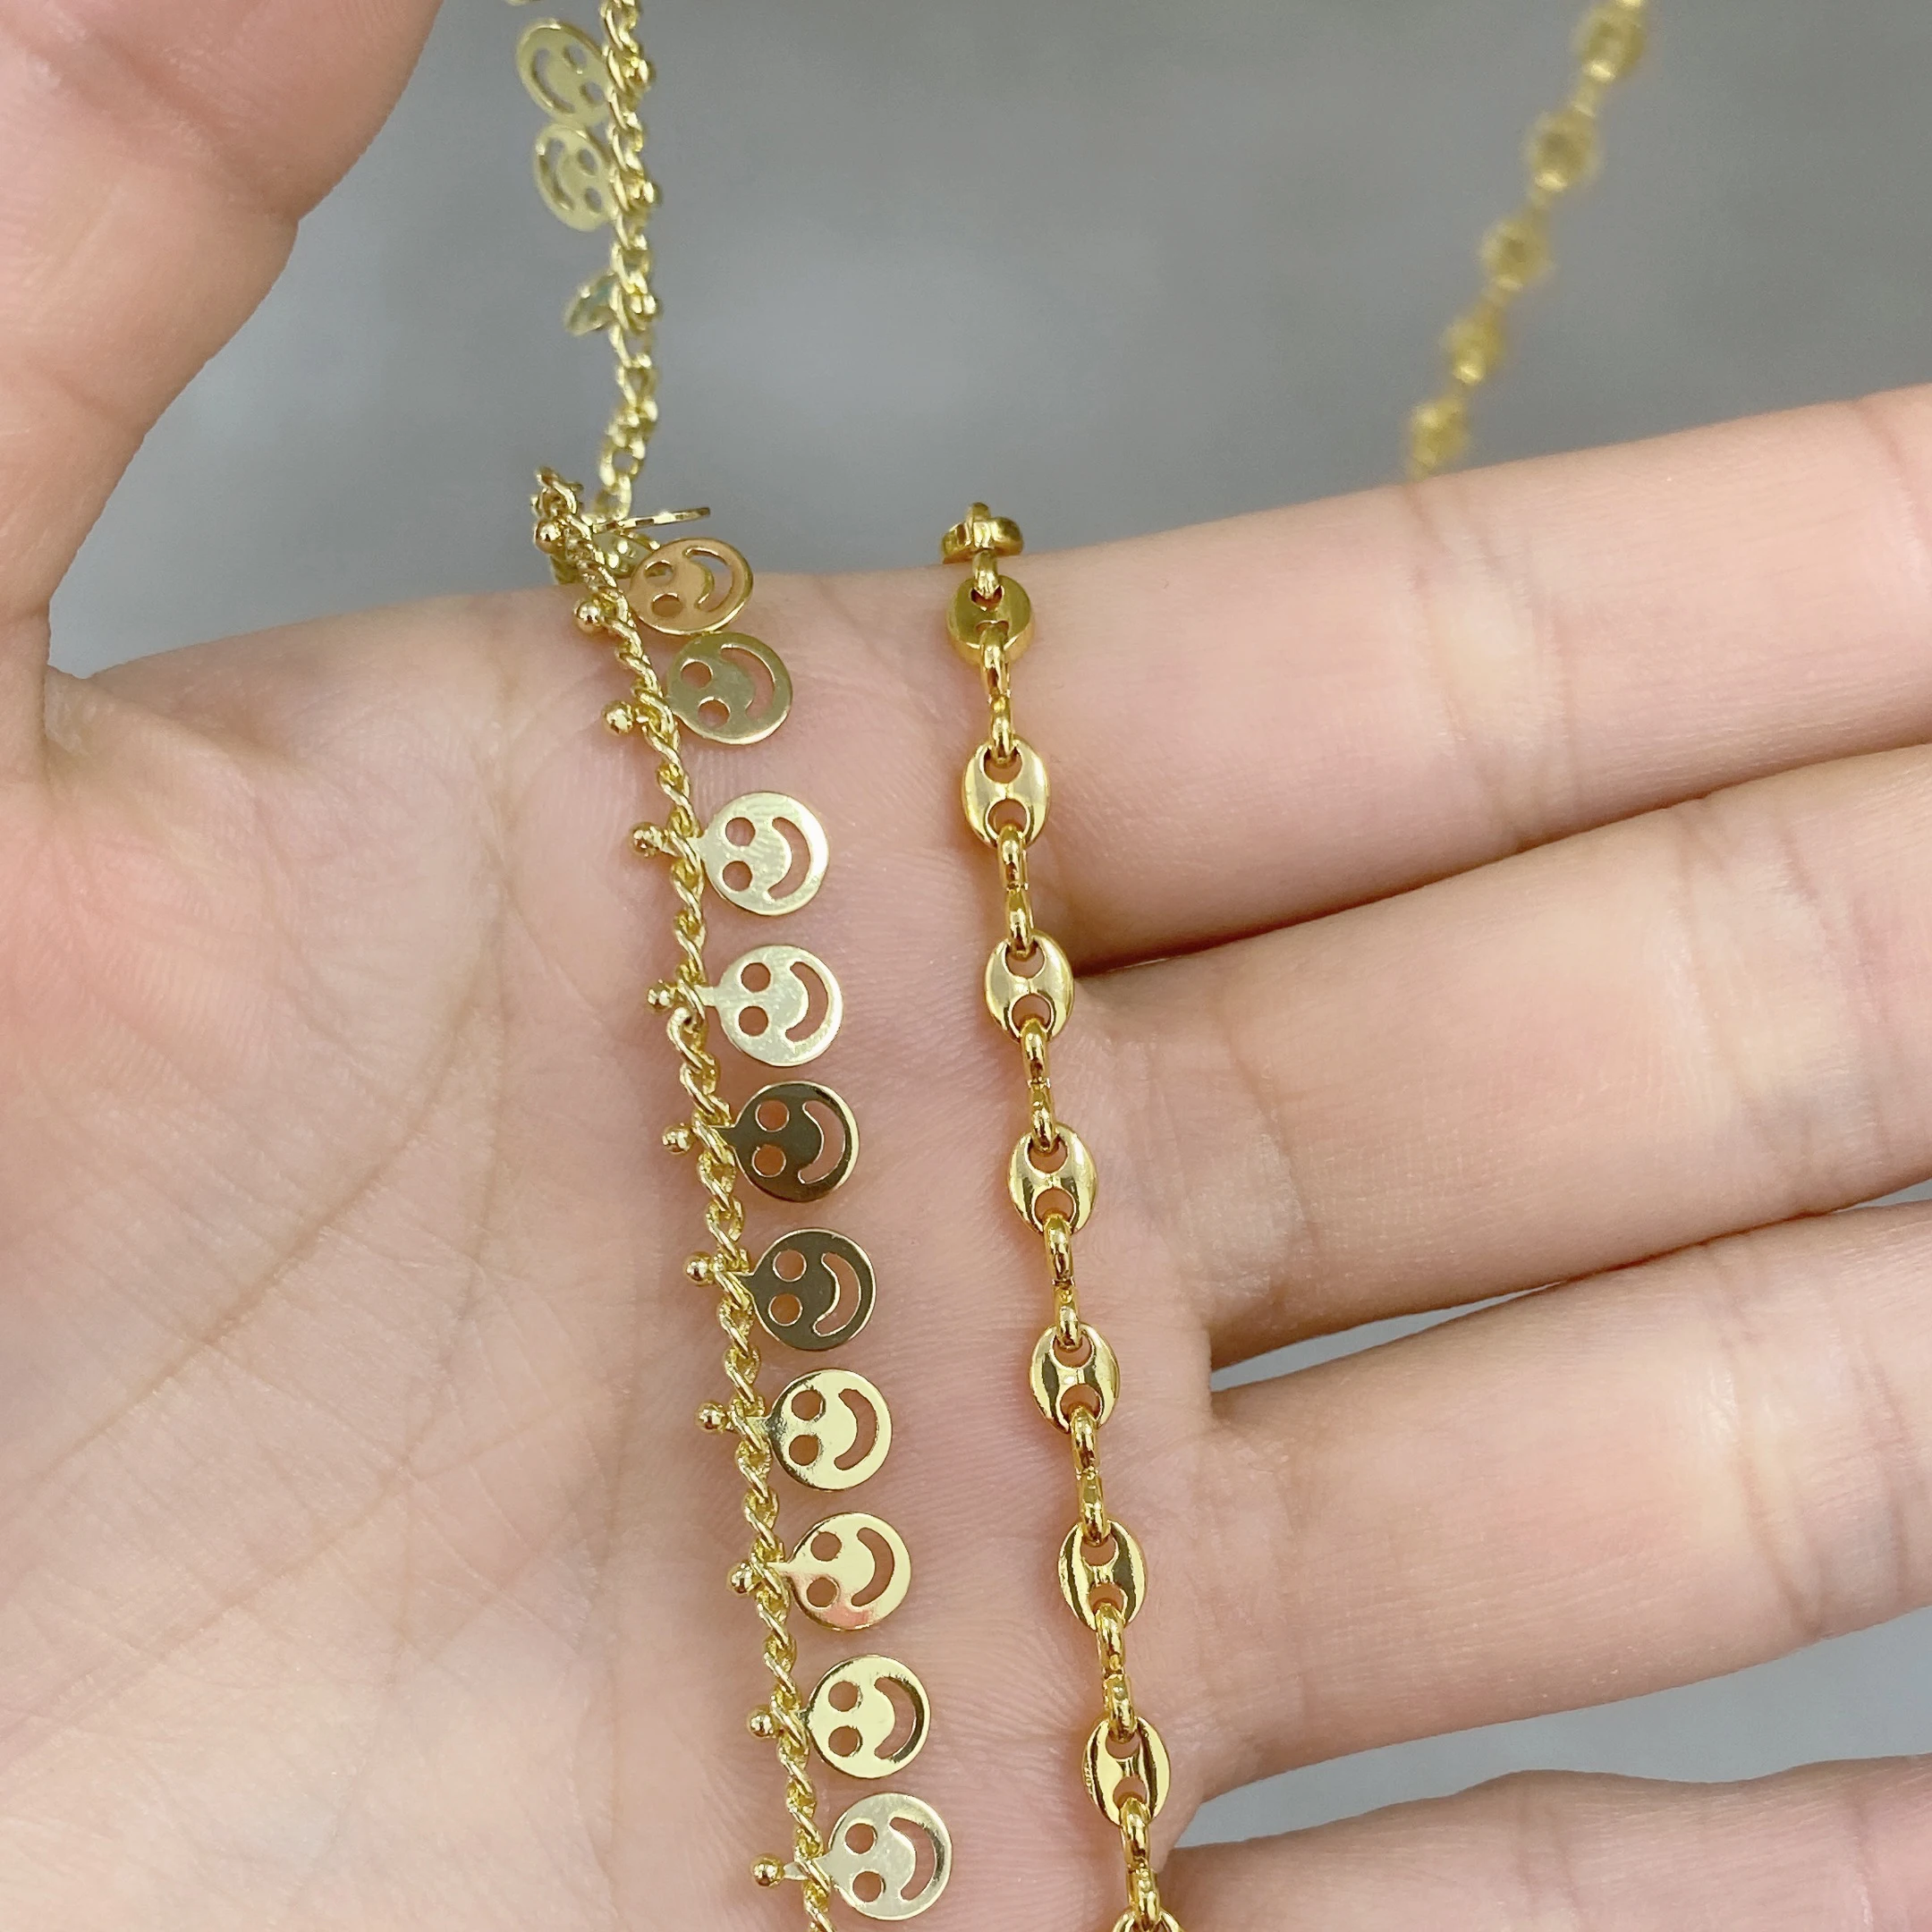 10meters/Lot Handmade Finding DIY Gold Plated Bracelets Necklace Small Size Pig Nose Smile Face Chains